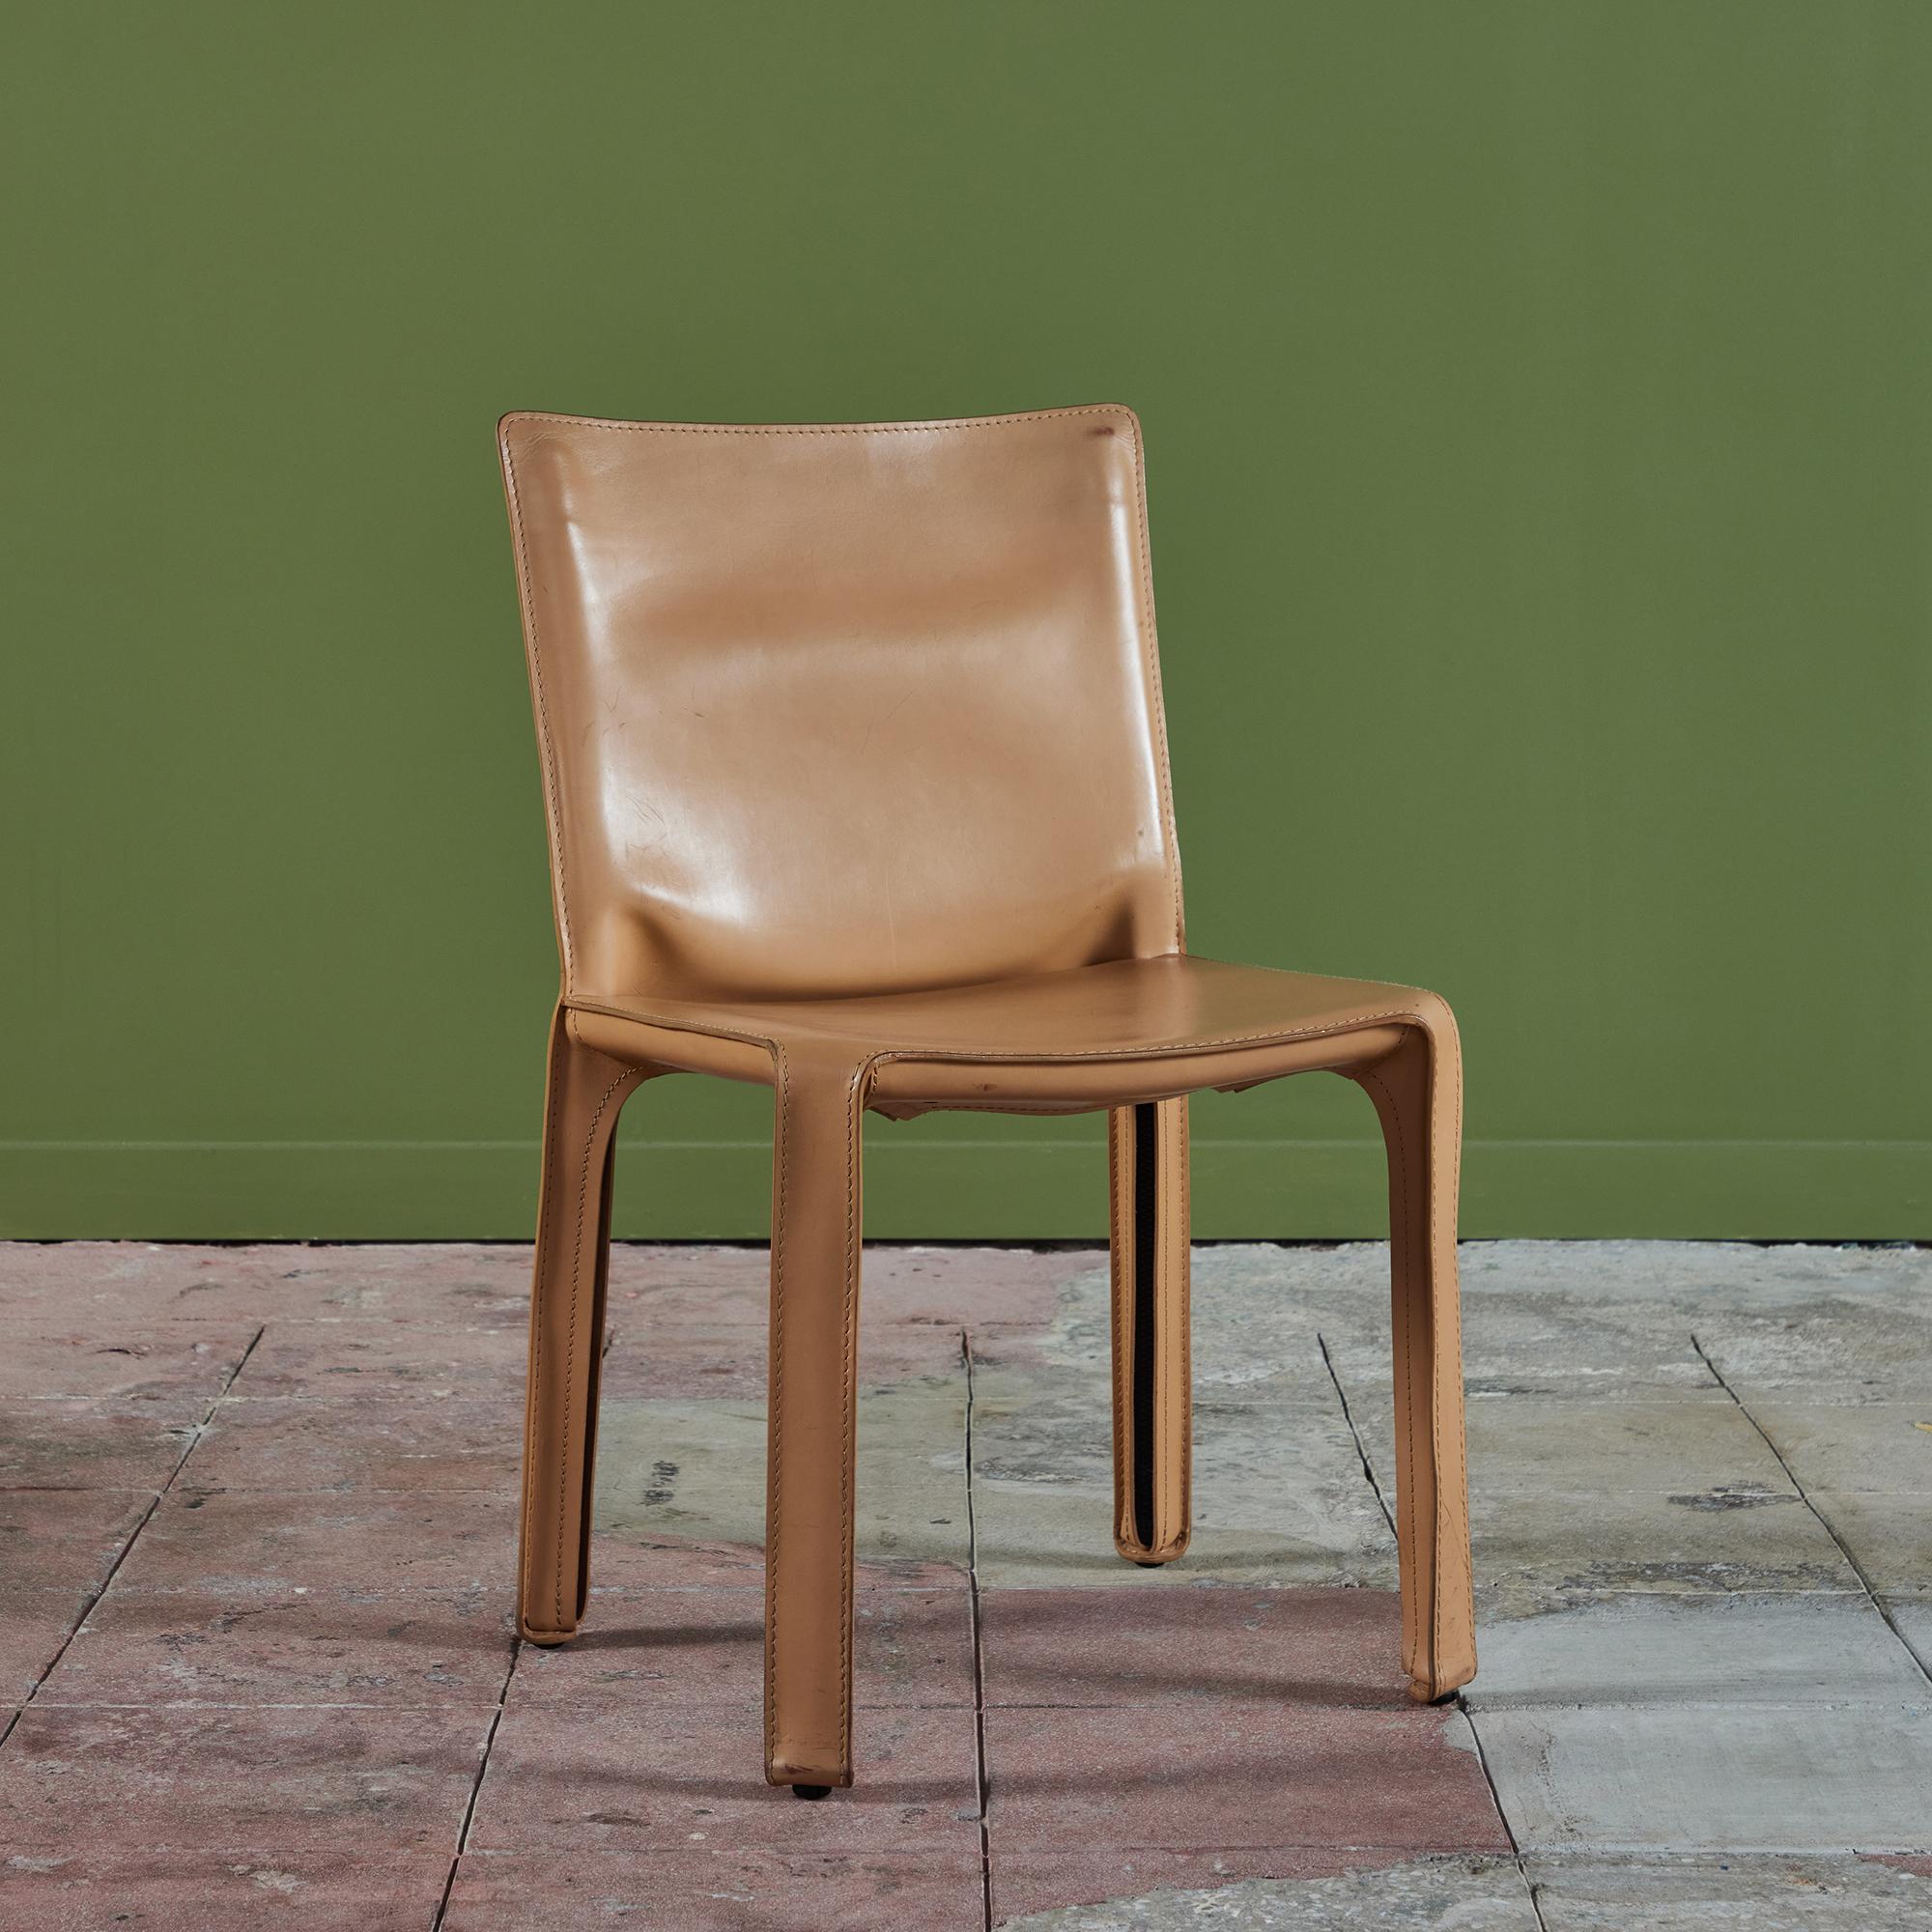 This iconic design by Mario Bellini for Cassina c.1970s, Italy, features the original natural toned saddle leather which is wrapped atop a steel frame. The back of each leg features a black zippered detail. The bottom of the chairs are marked -